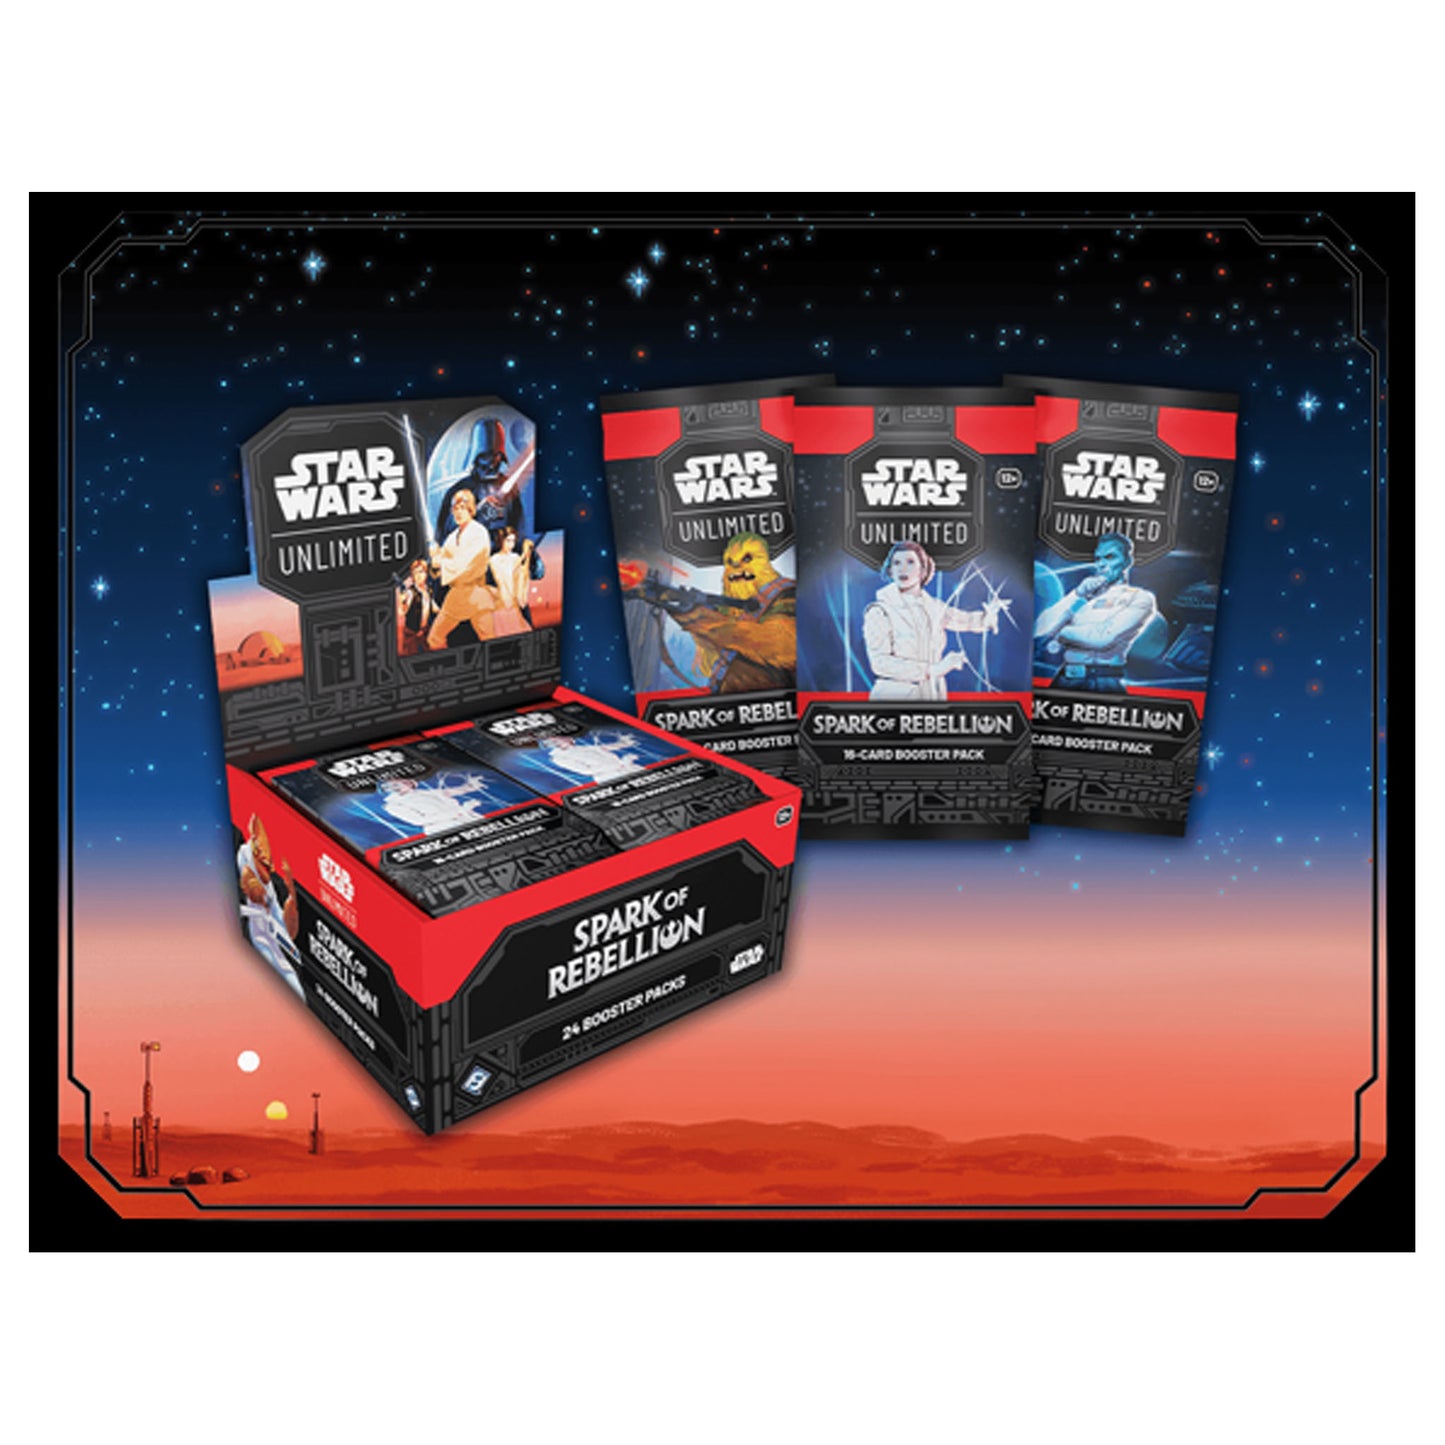 Star Wars : Unlimited Spark of Rebellion Booster Box